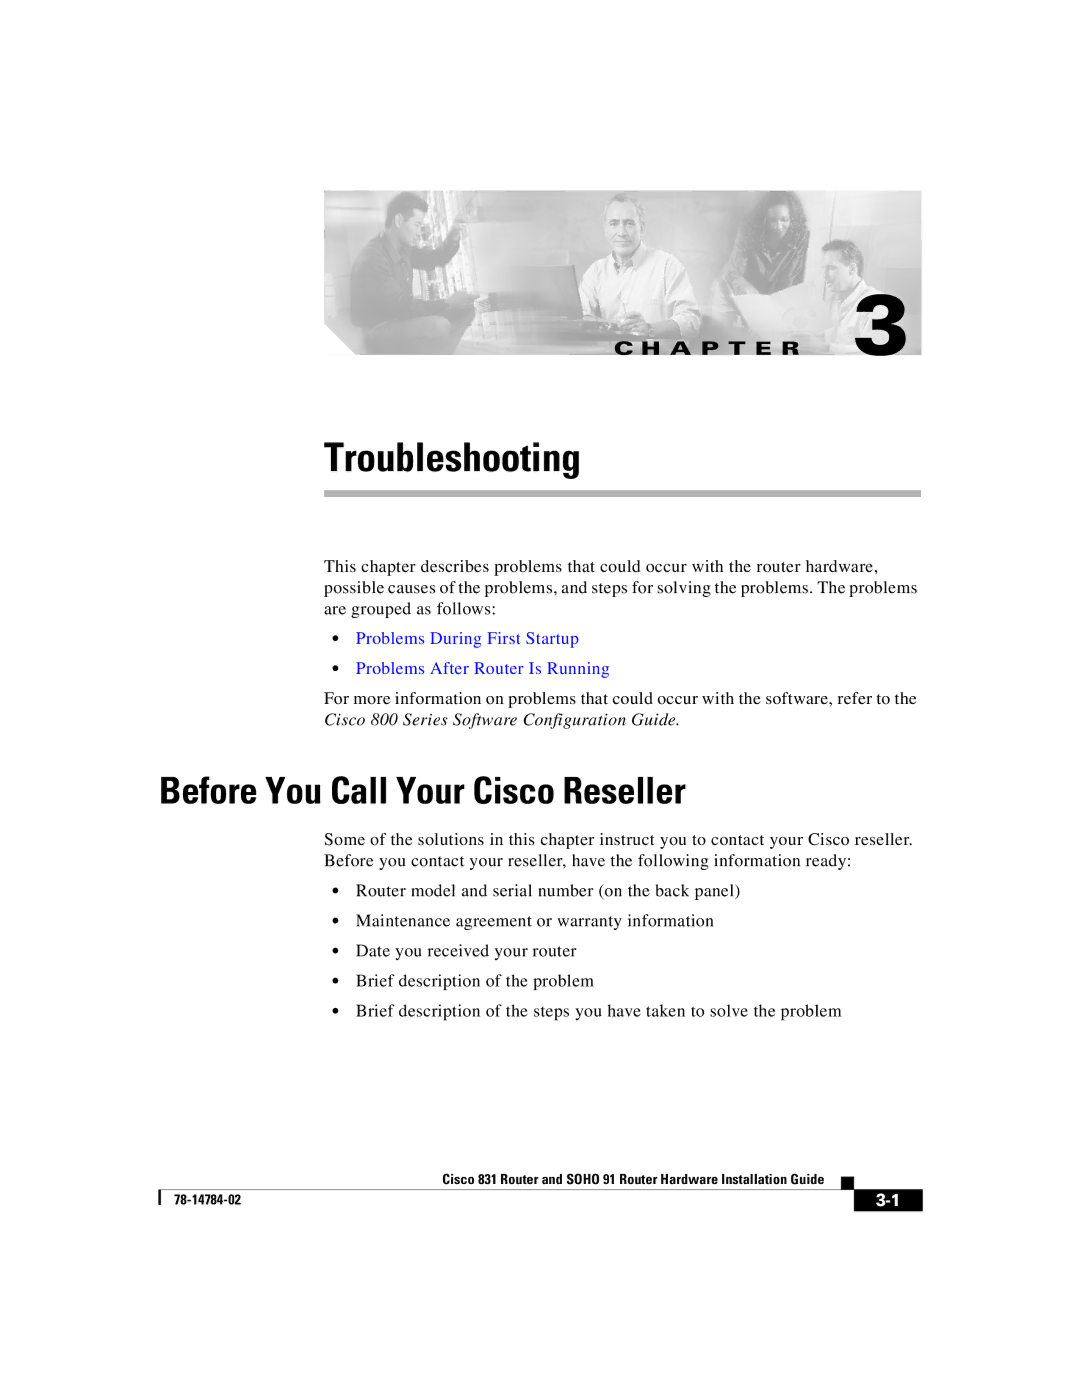 Cisco Systems Cisco 831 manual Troubleshooting, Before You Call Your Cisco Reseller 